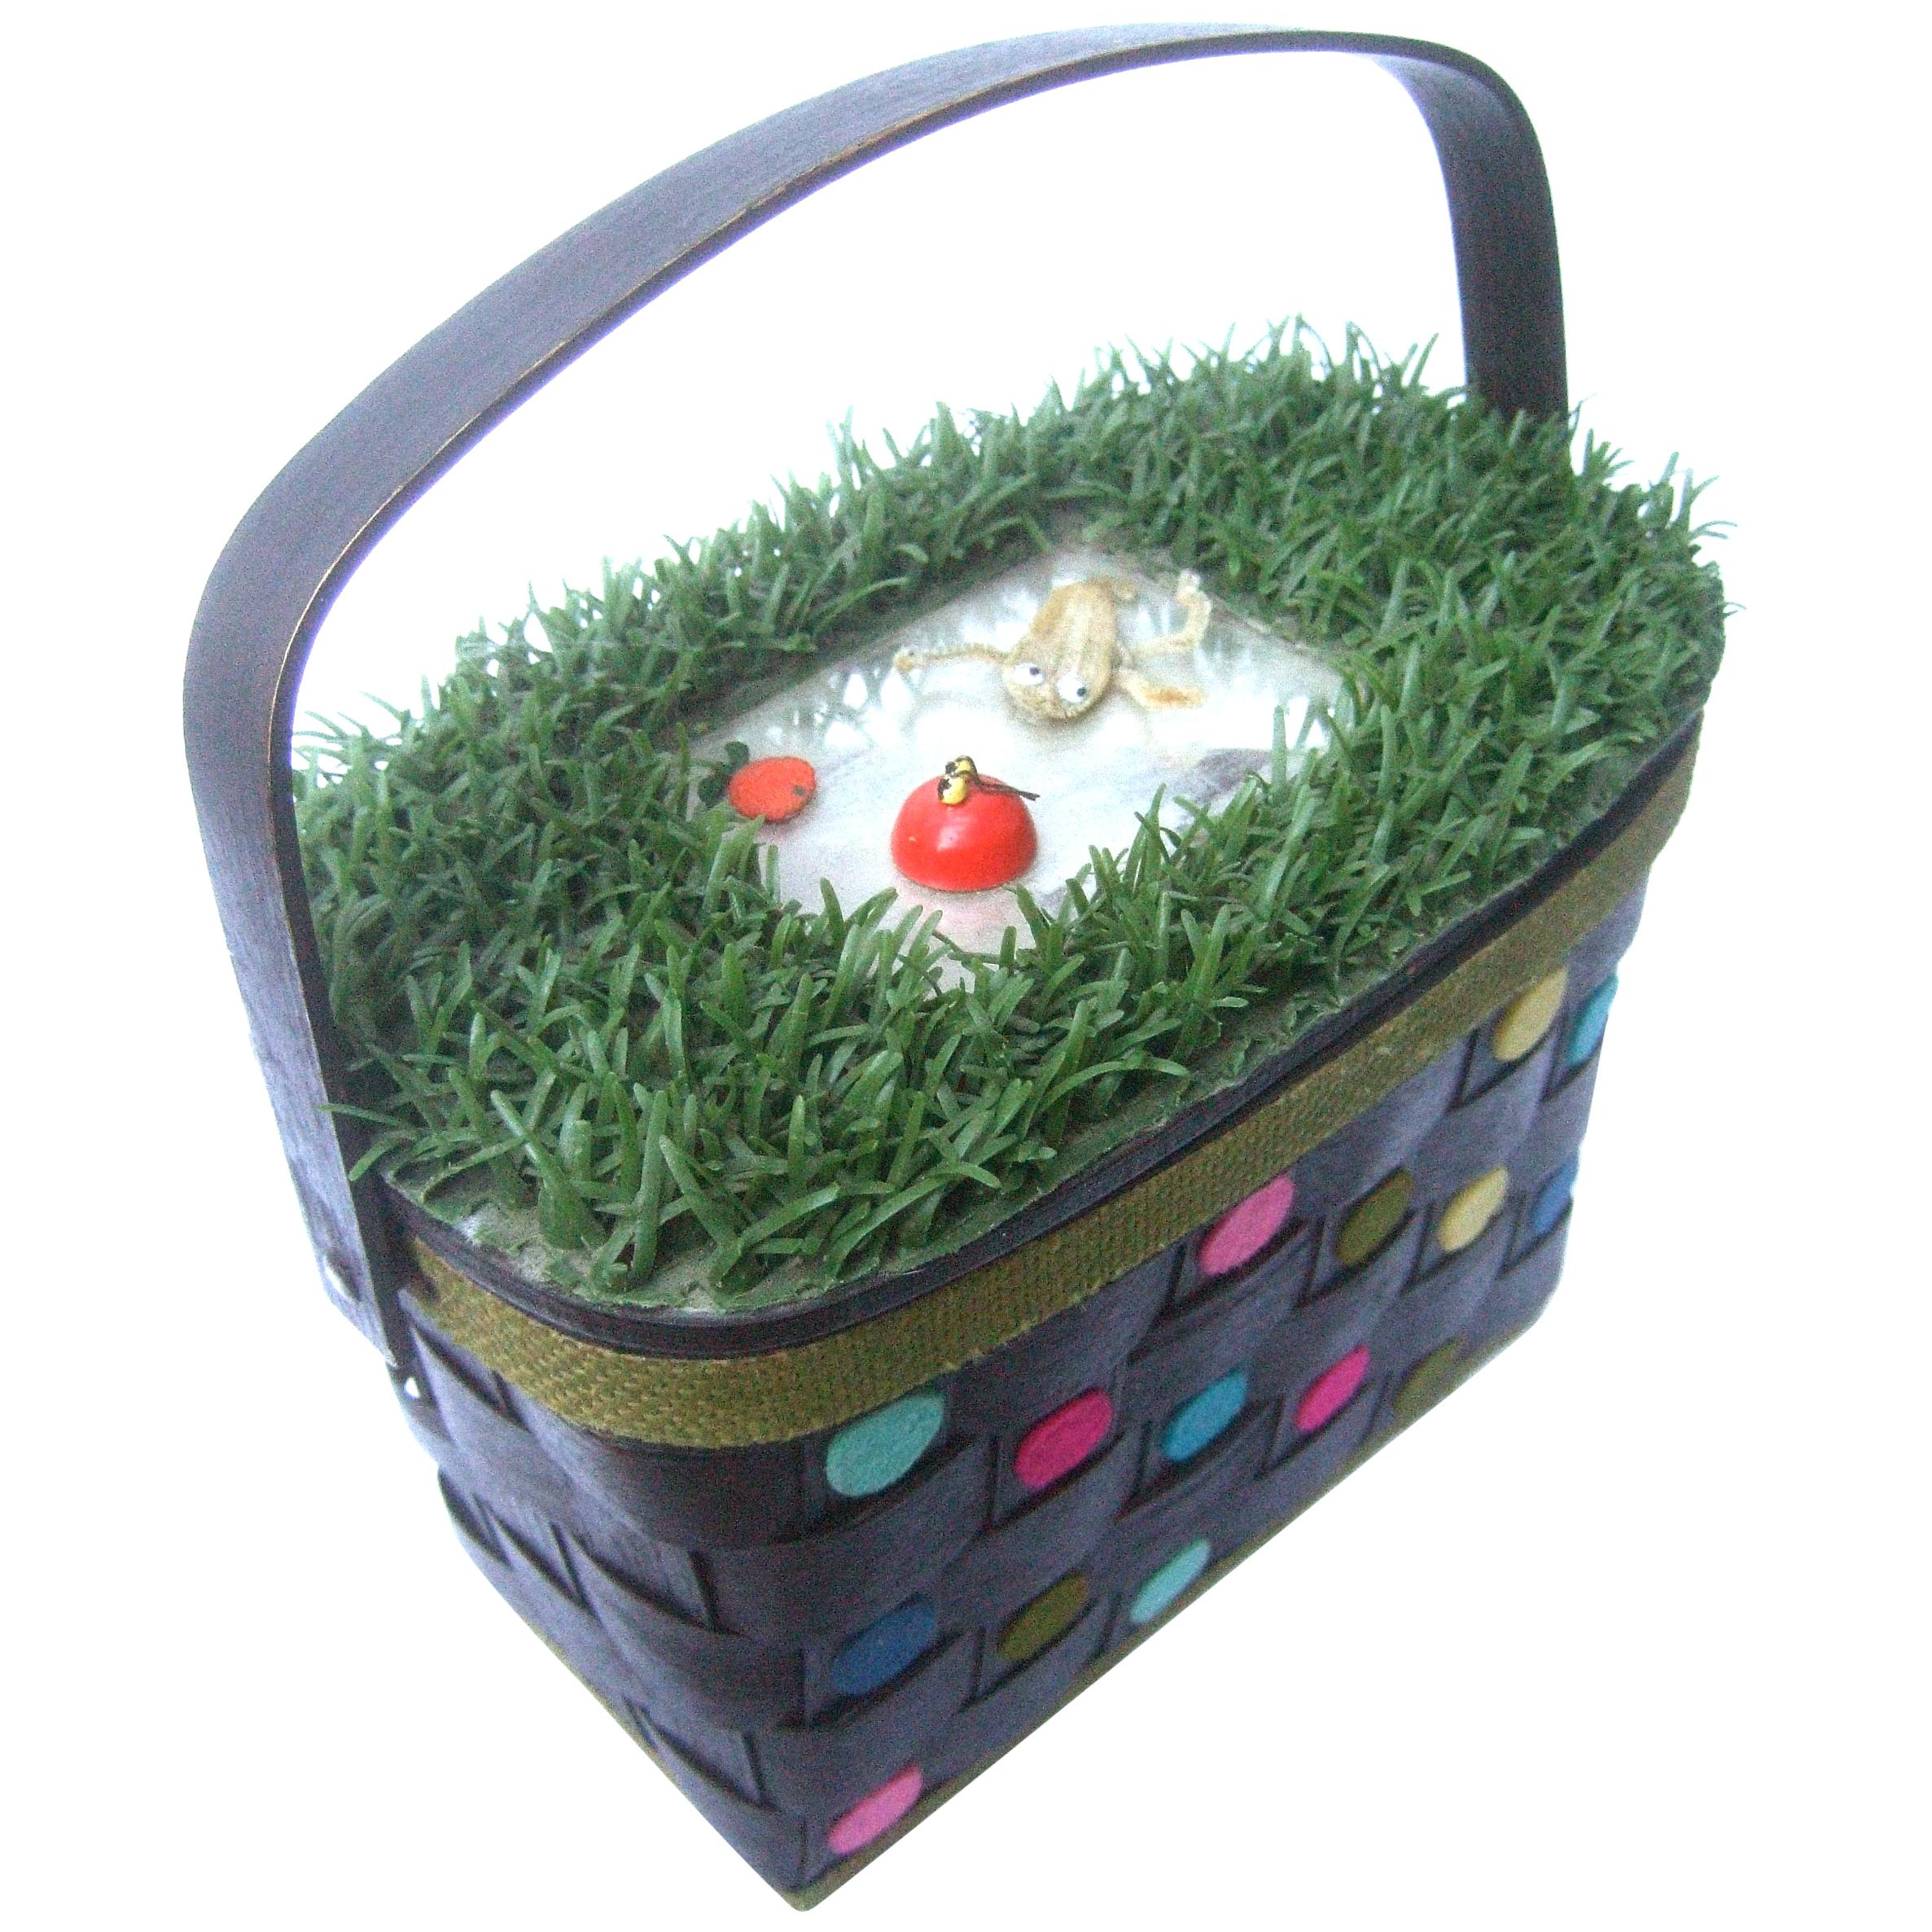 Whimsical astroturf woven wicker handmade basket purse c 1970
The quirky one of a kind retro handbag is designed with an astroturf lid cover
A mirror is placed on the center of the exterior lid cover with a pair of insects
glued onto the glass